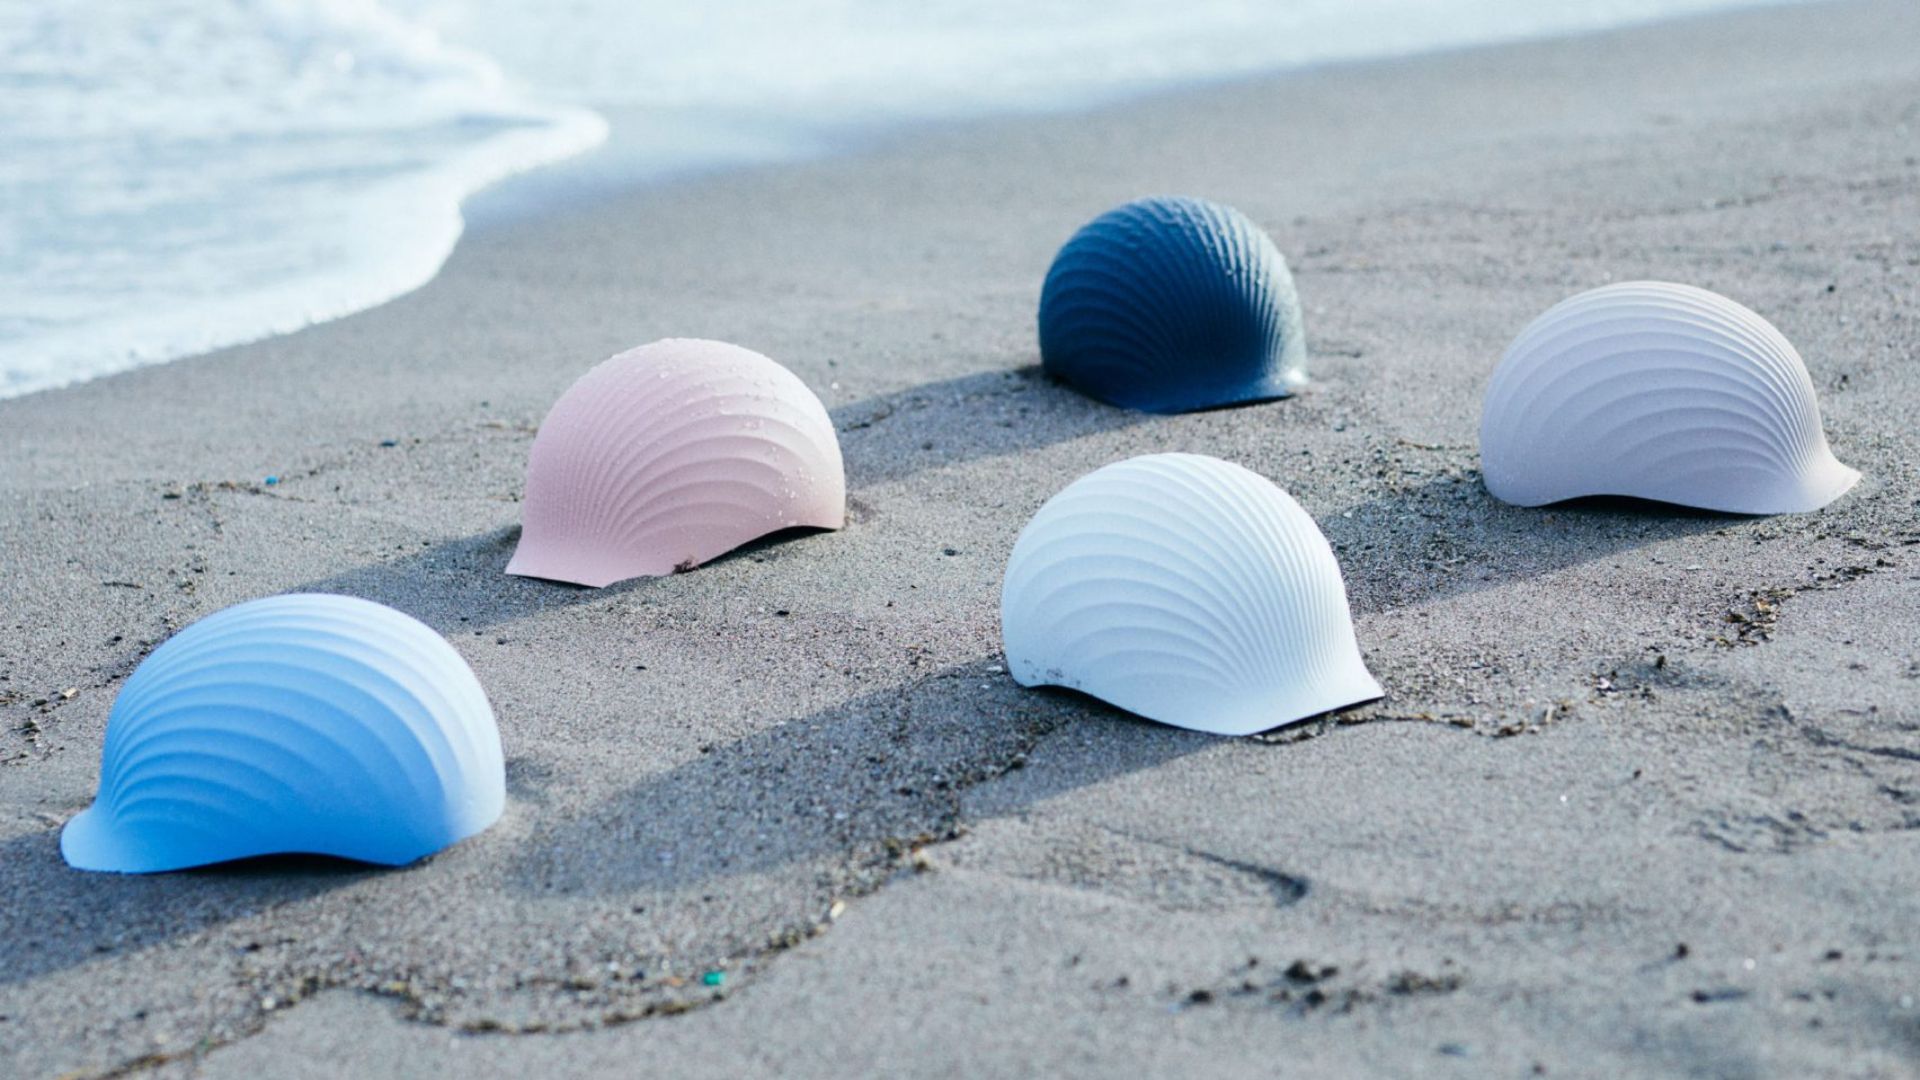 7 innovative projects made from discarded seashells : DesignWanted